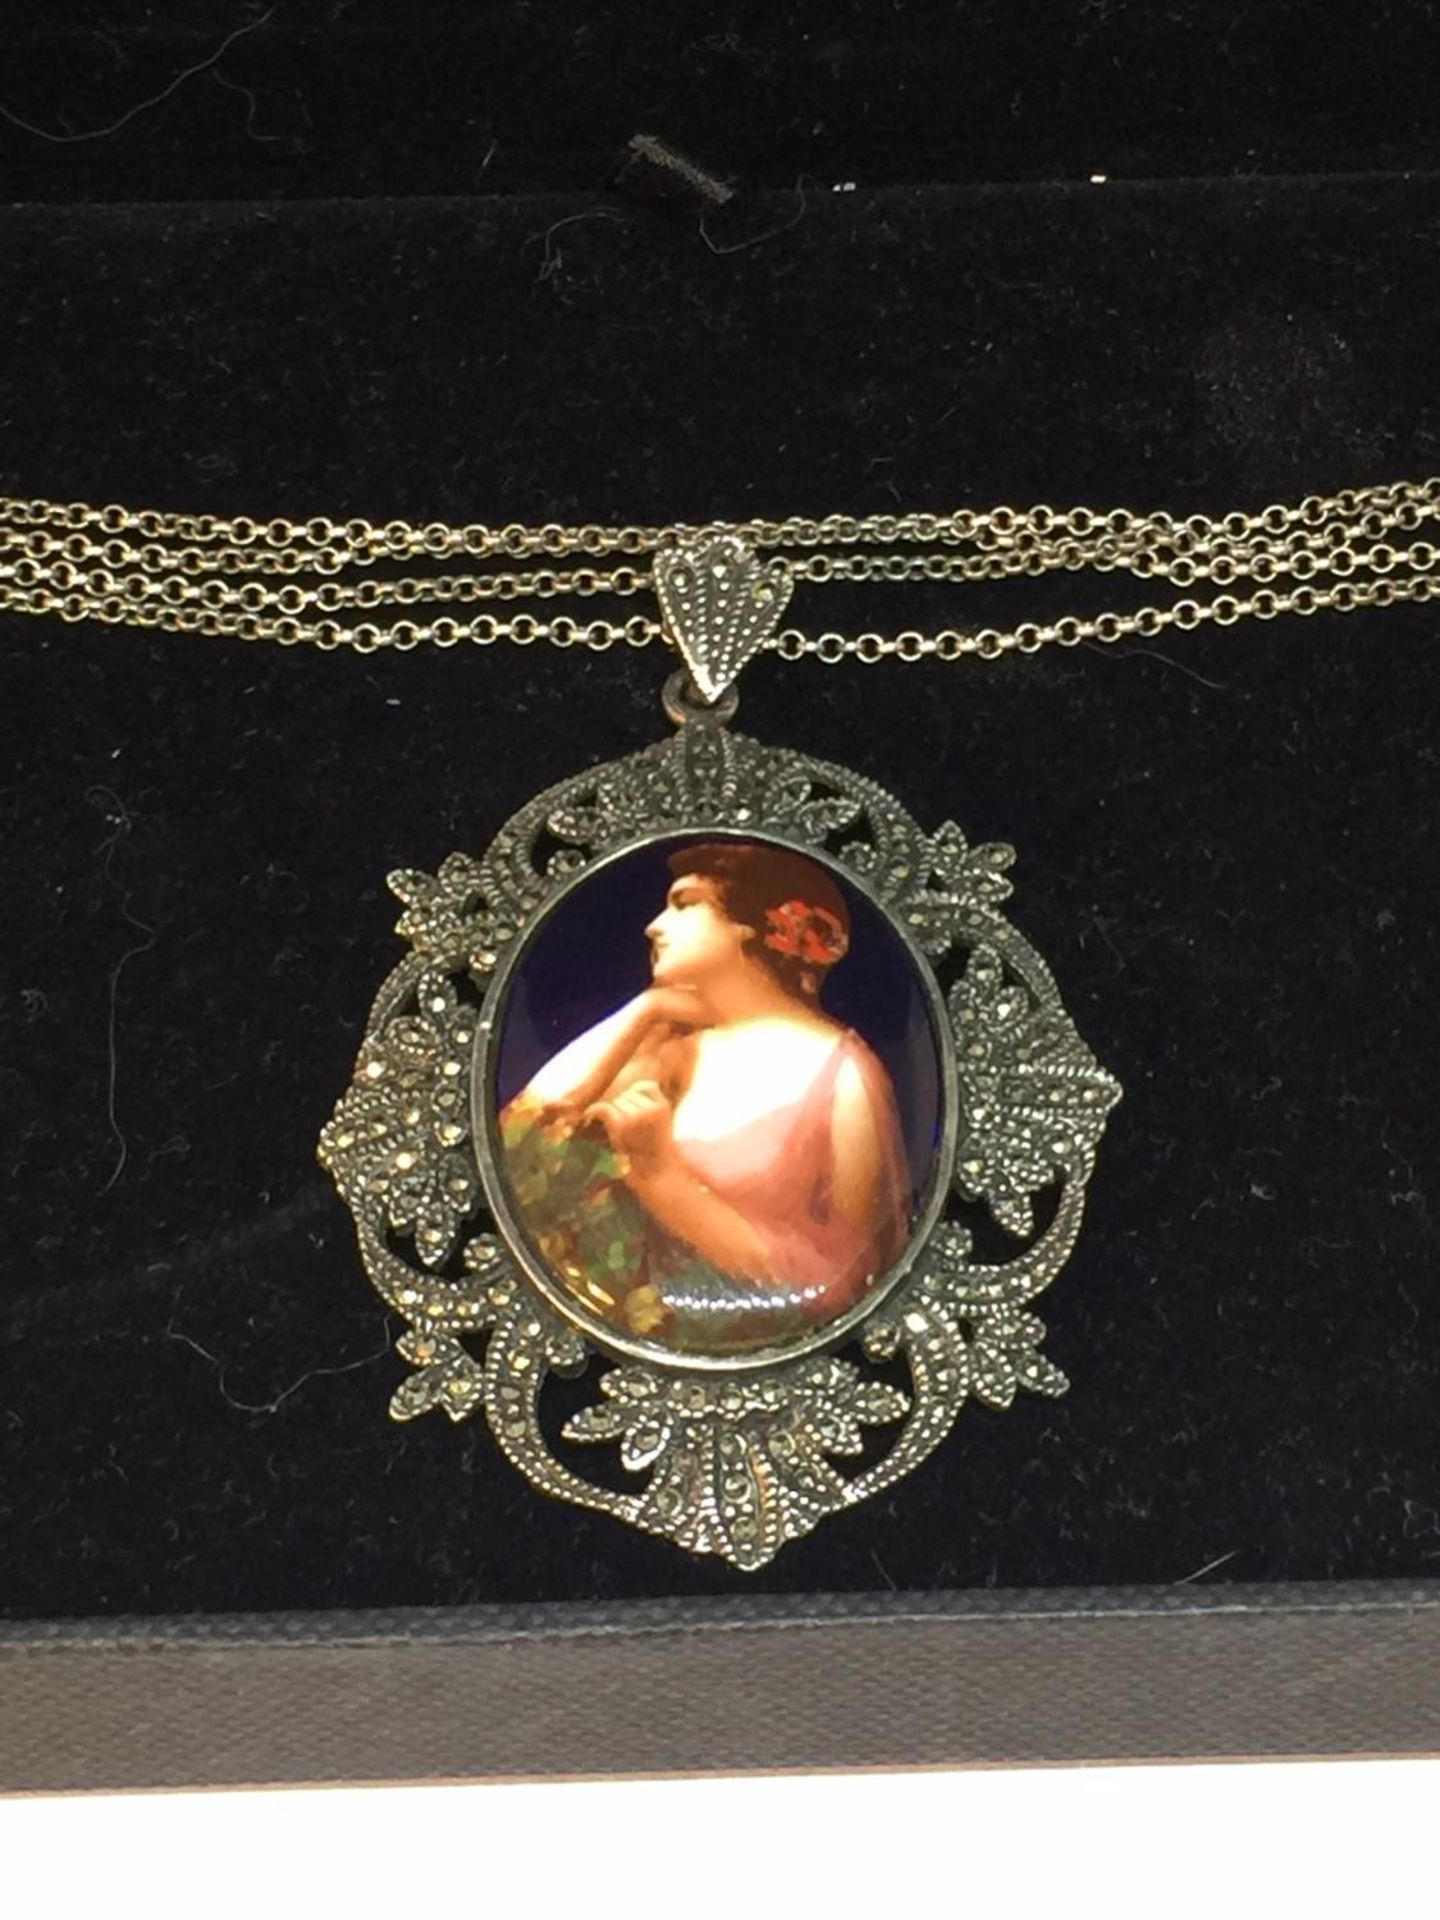 A SILVER NECKLACE WITH PORTRAIT PENDANT IN A PRESENTATION BOX